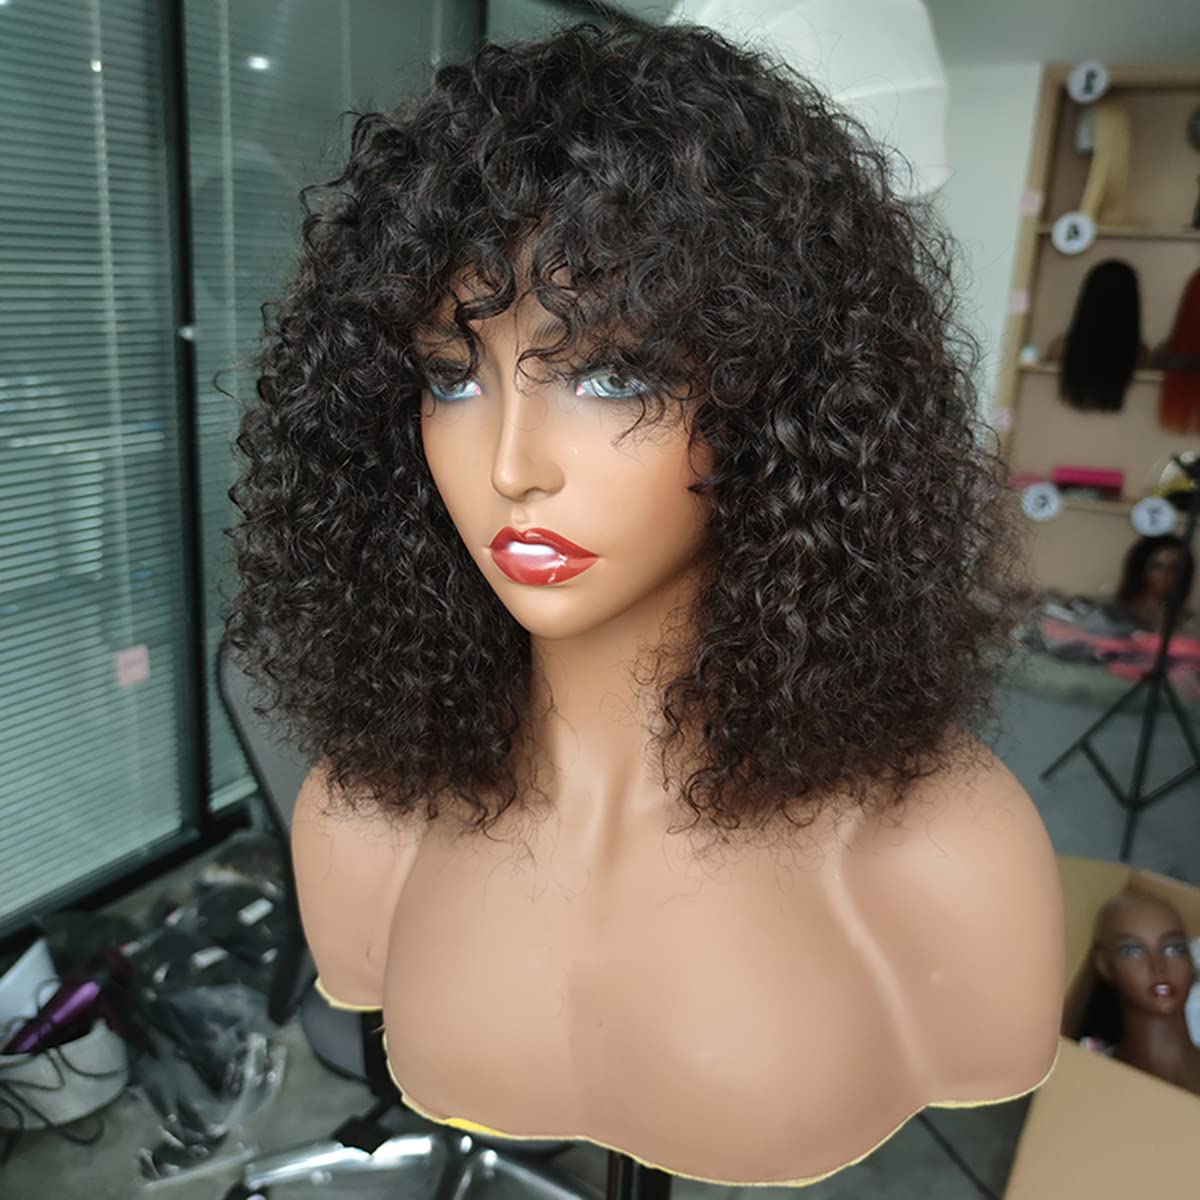 16INCH Short Curly Bob Wig With Bangs Human Hair Natural black Bouncy Shaggy Fringe Bang Wigs For Women Real Brazilian Remy Hair